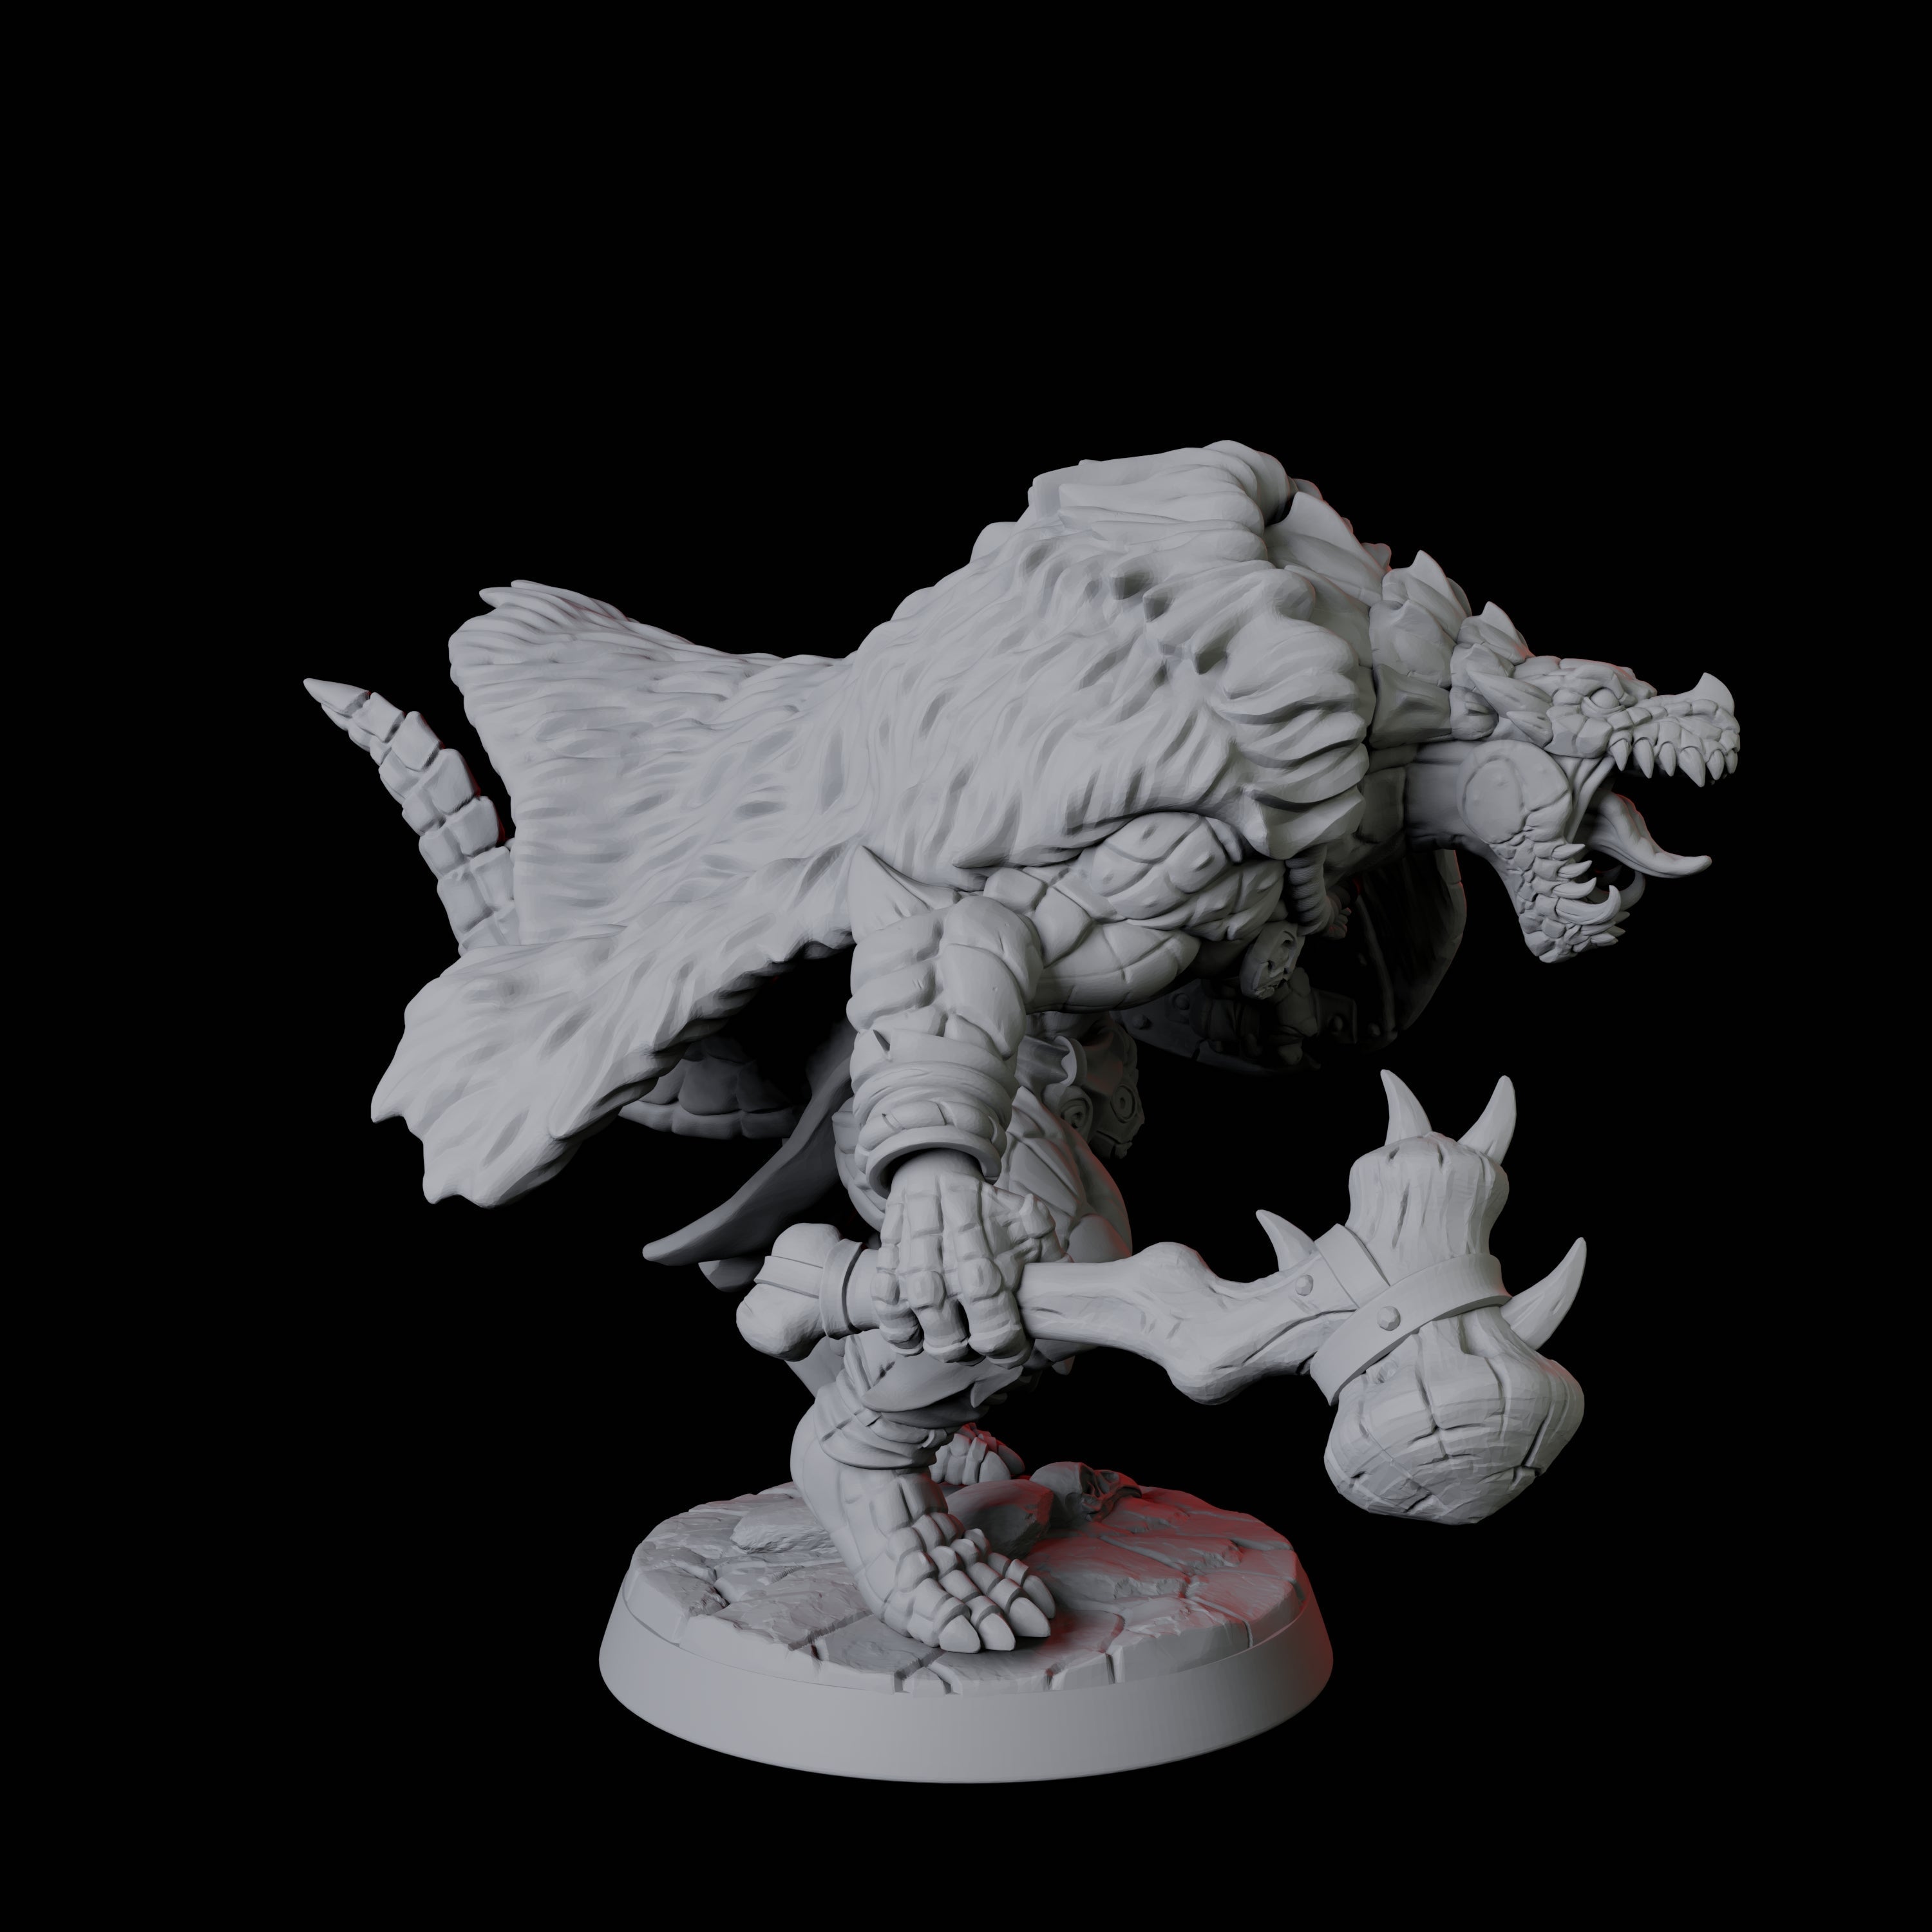 Powerful Frost Lizardfolk B Miniature for Dungeons and Dragons, Pathfinder or other TTRPGs